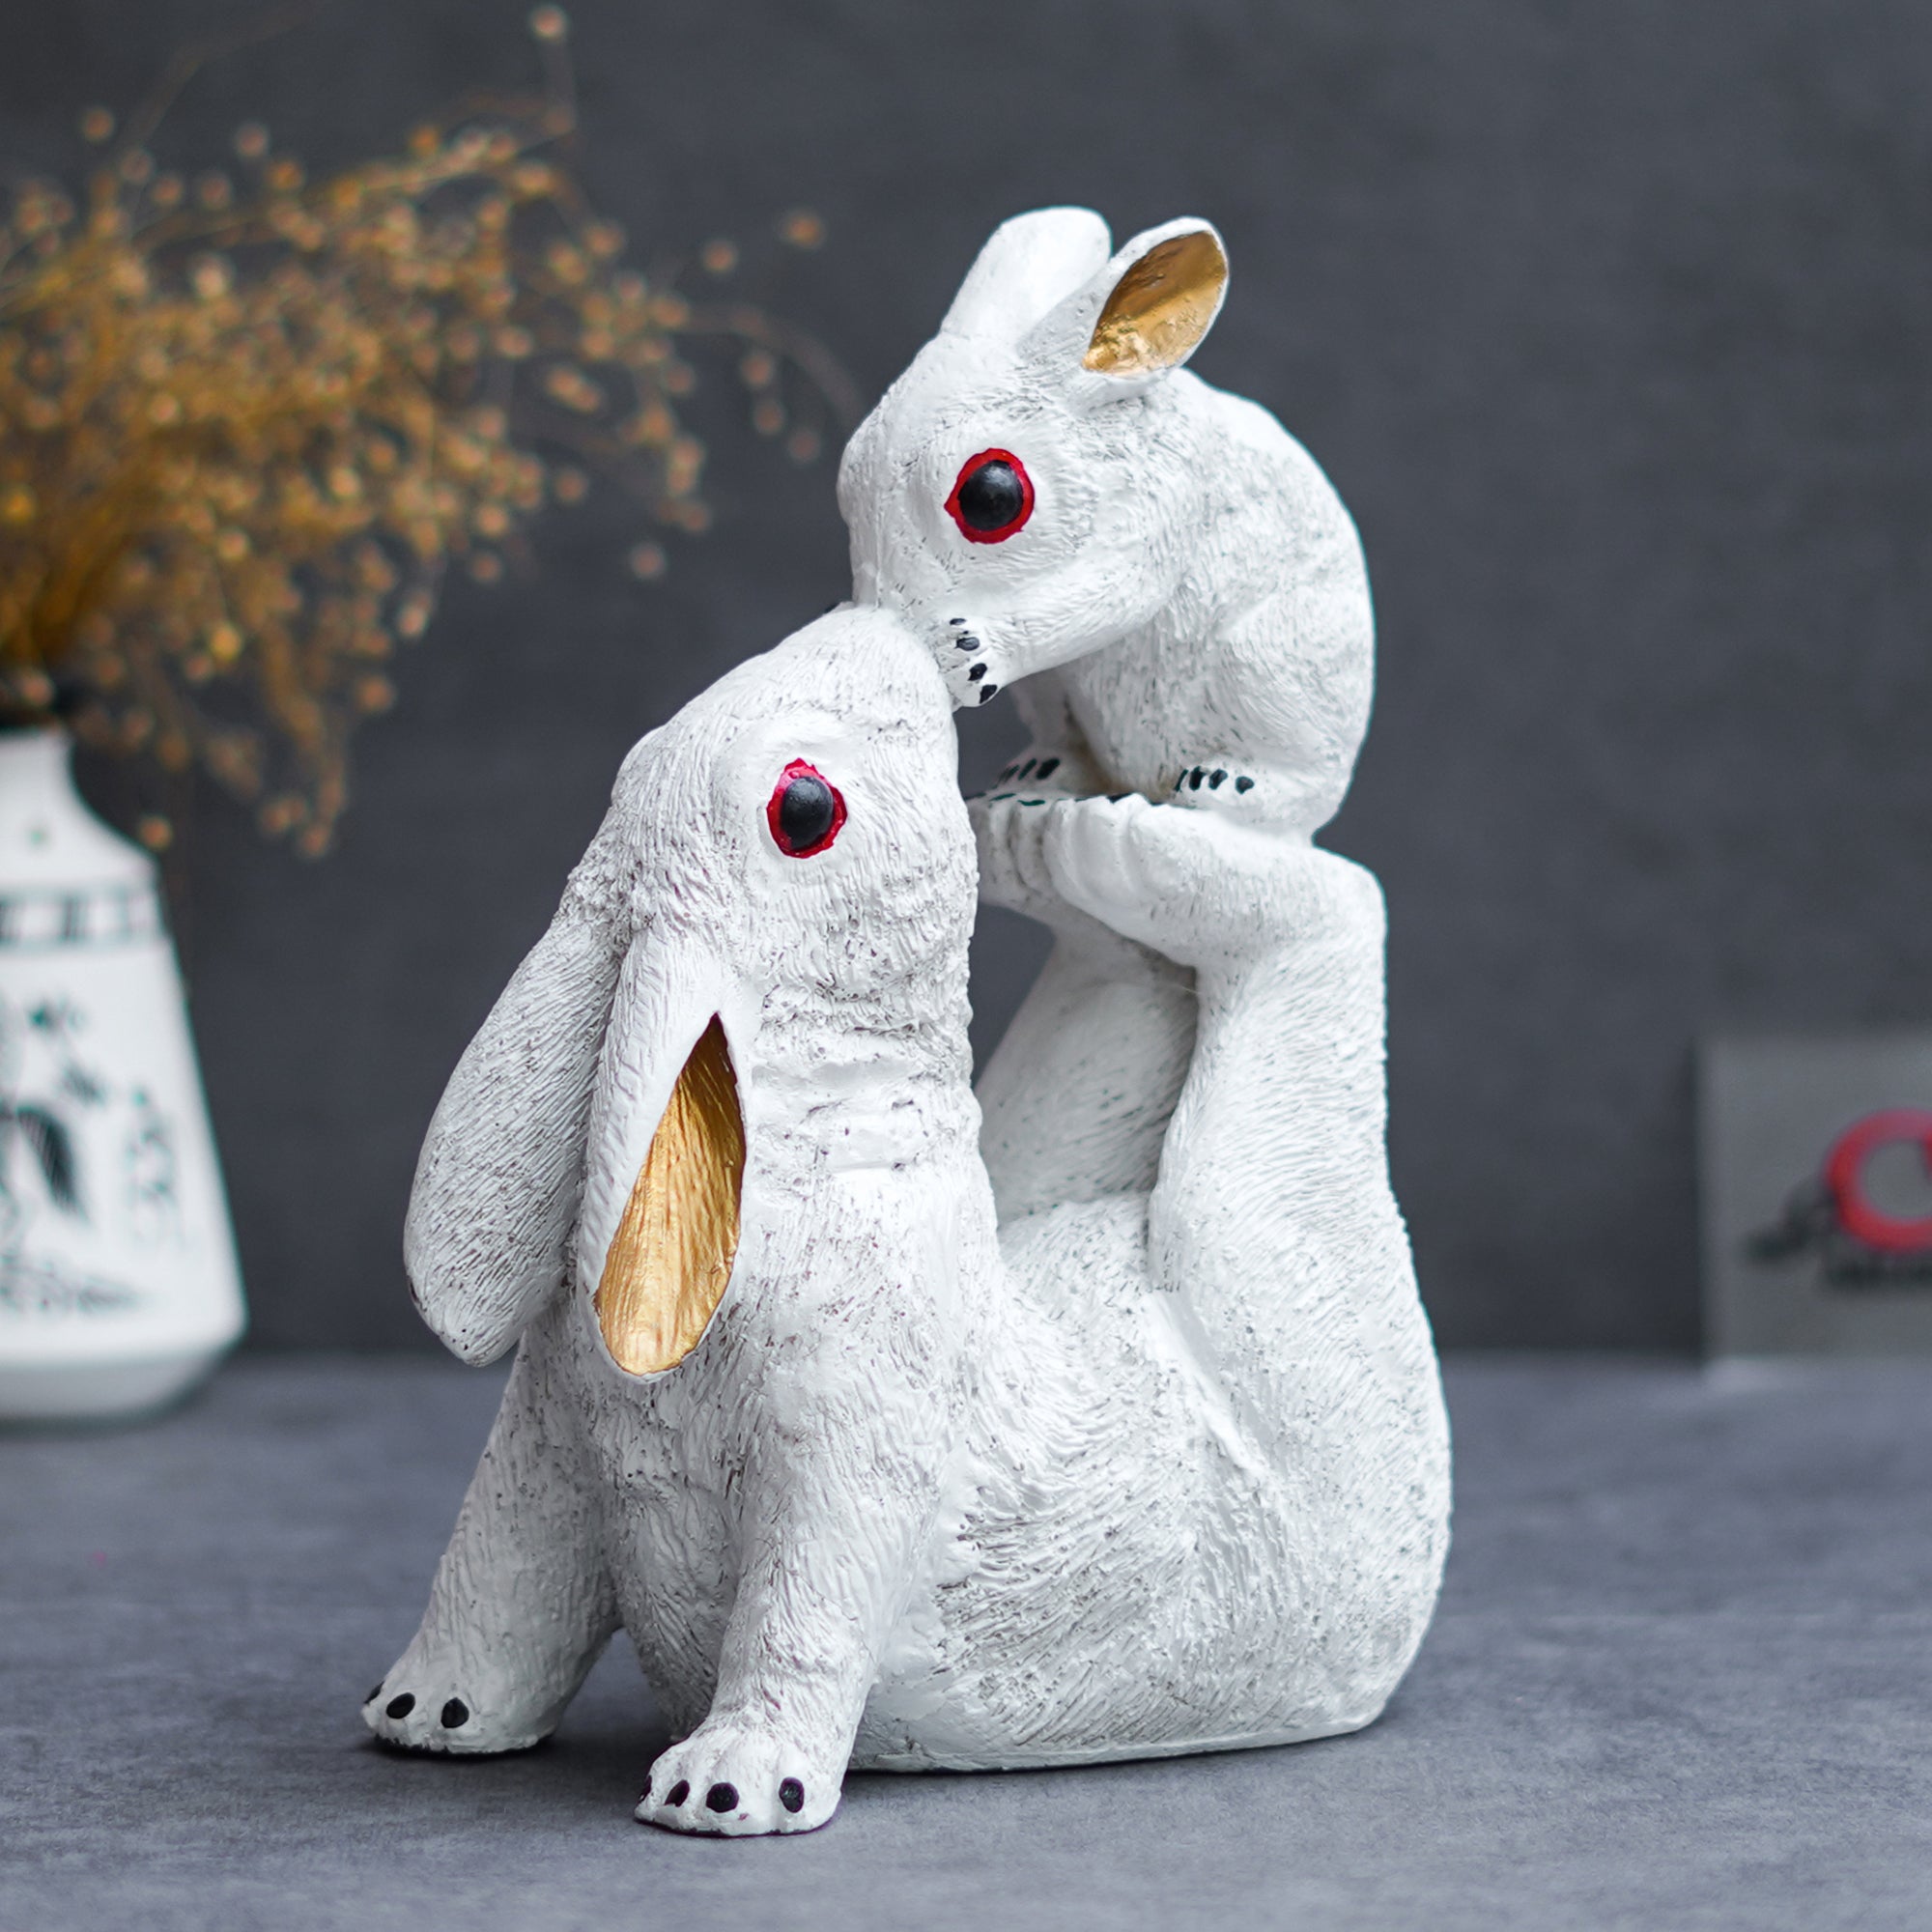 Gold and White Rabbit Statue with Bunny Animal Figurines Decorative Showpiece for Home Decor 4